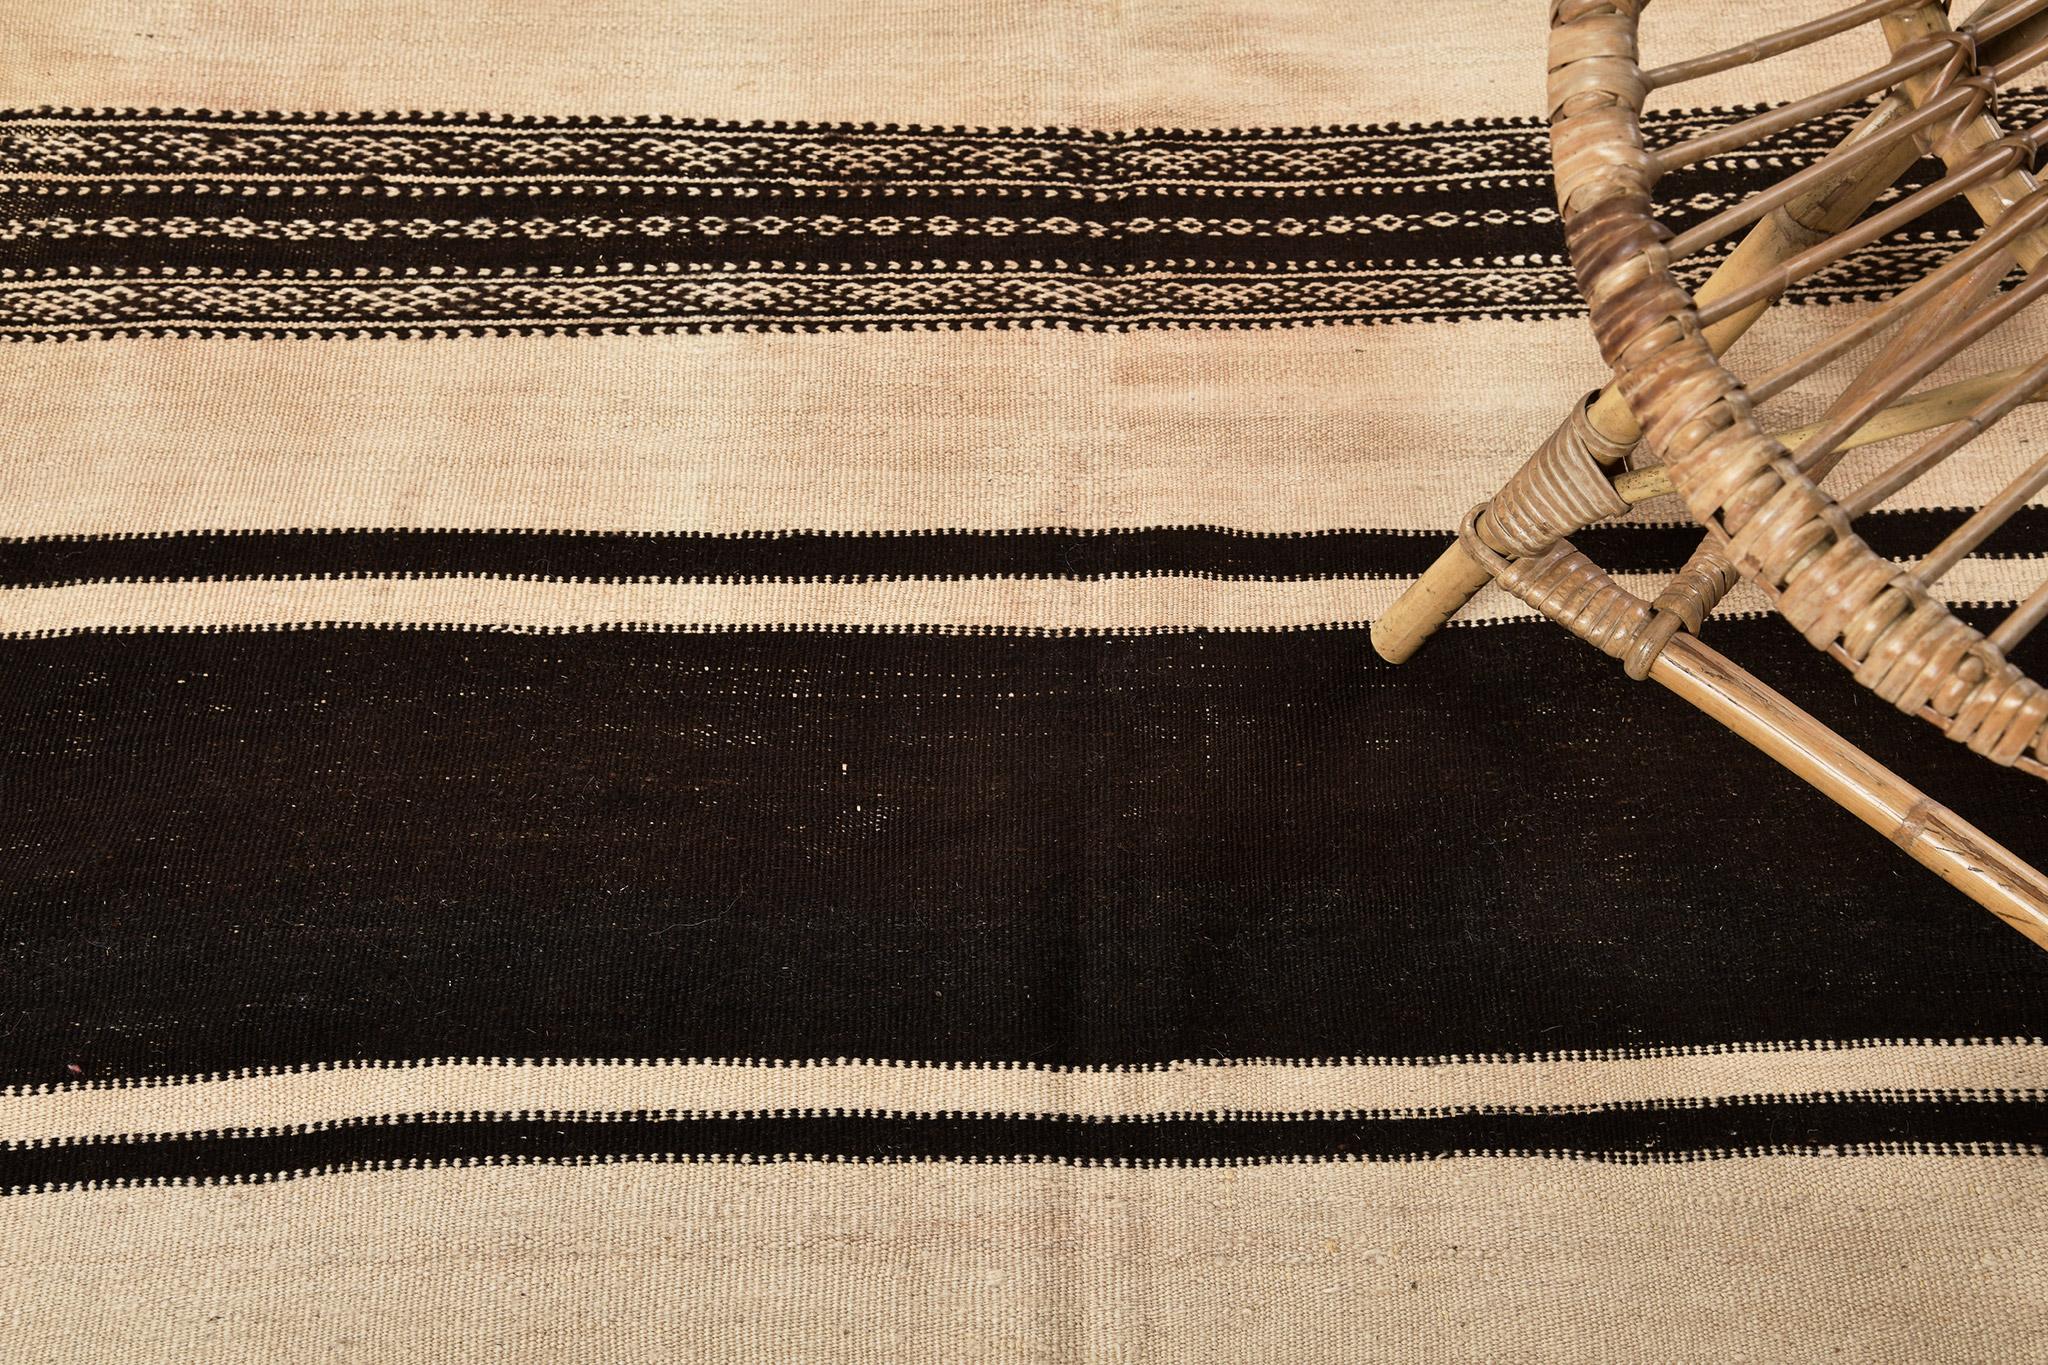 Near-square flatweave piece in alternating bands of natural brown and ivory with pattern elaborations at center and edges.  A unique vintage tribal rug from the Atlas Mountains of Morocco.